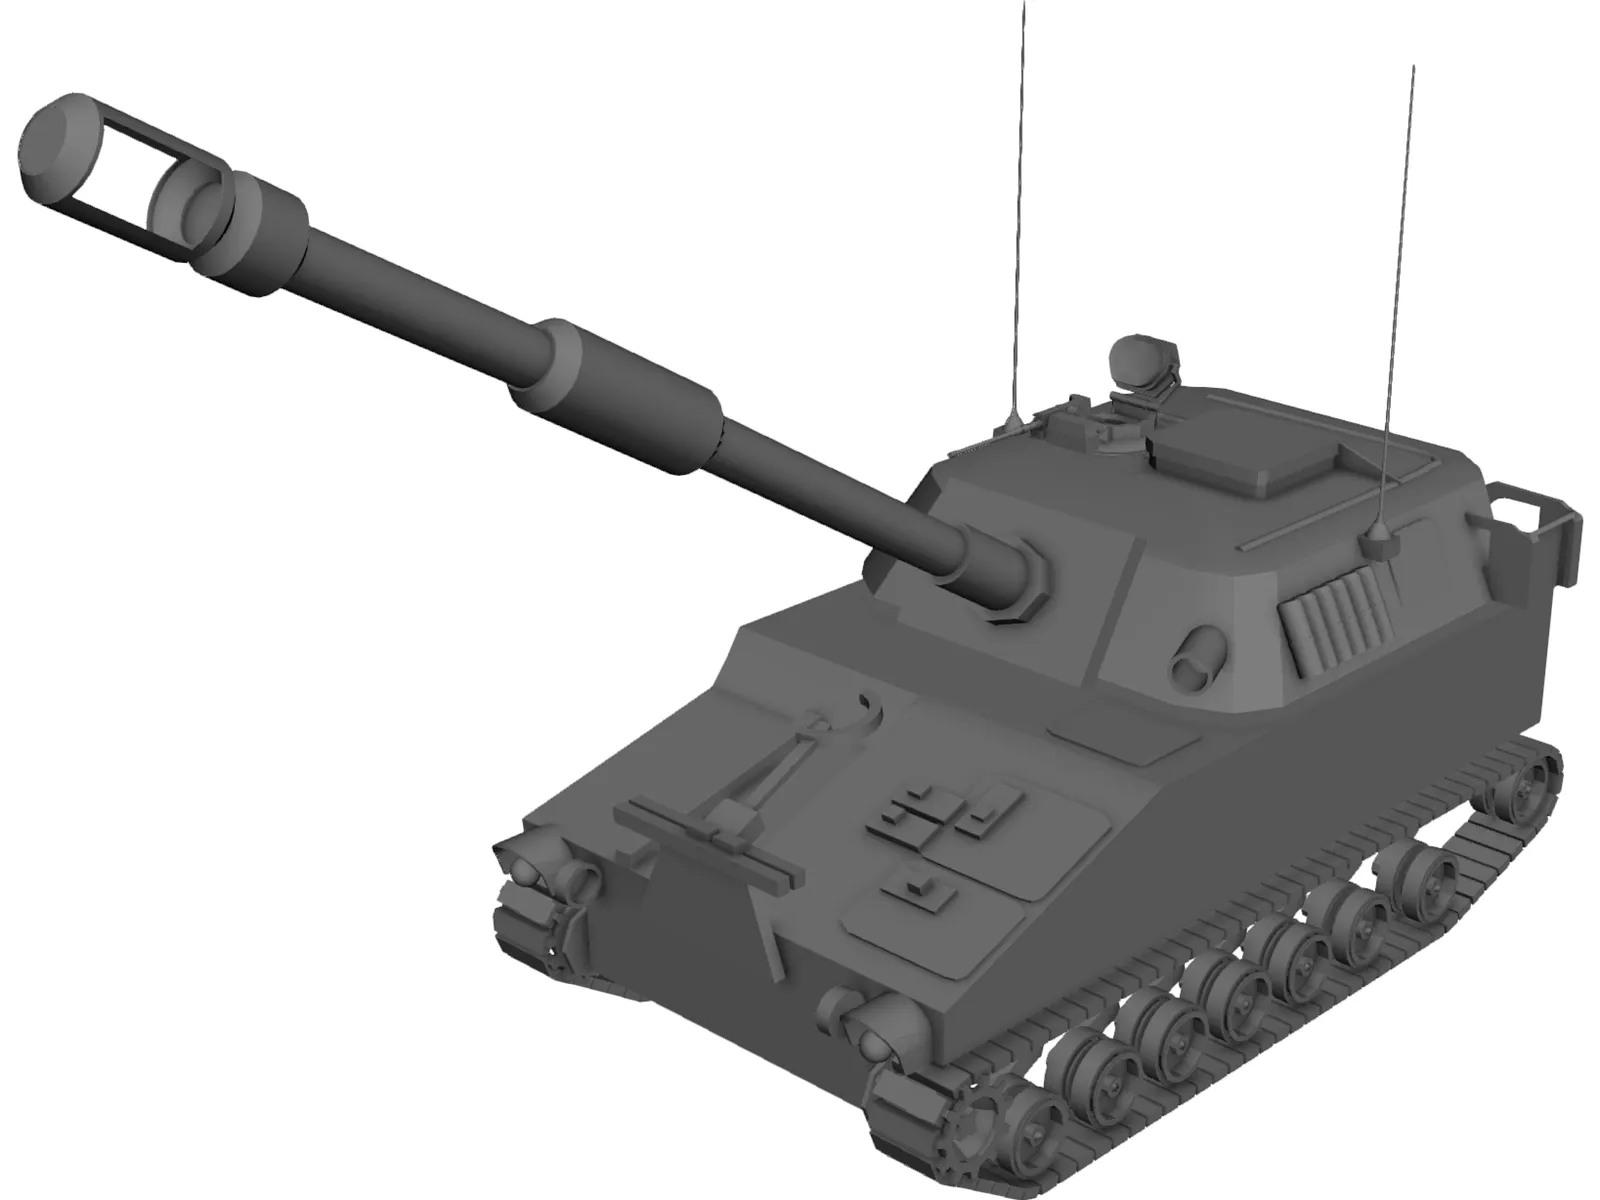 M109A6 Paladin Self-Propelled Howitzer 3D Model